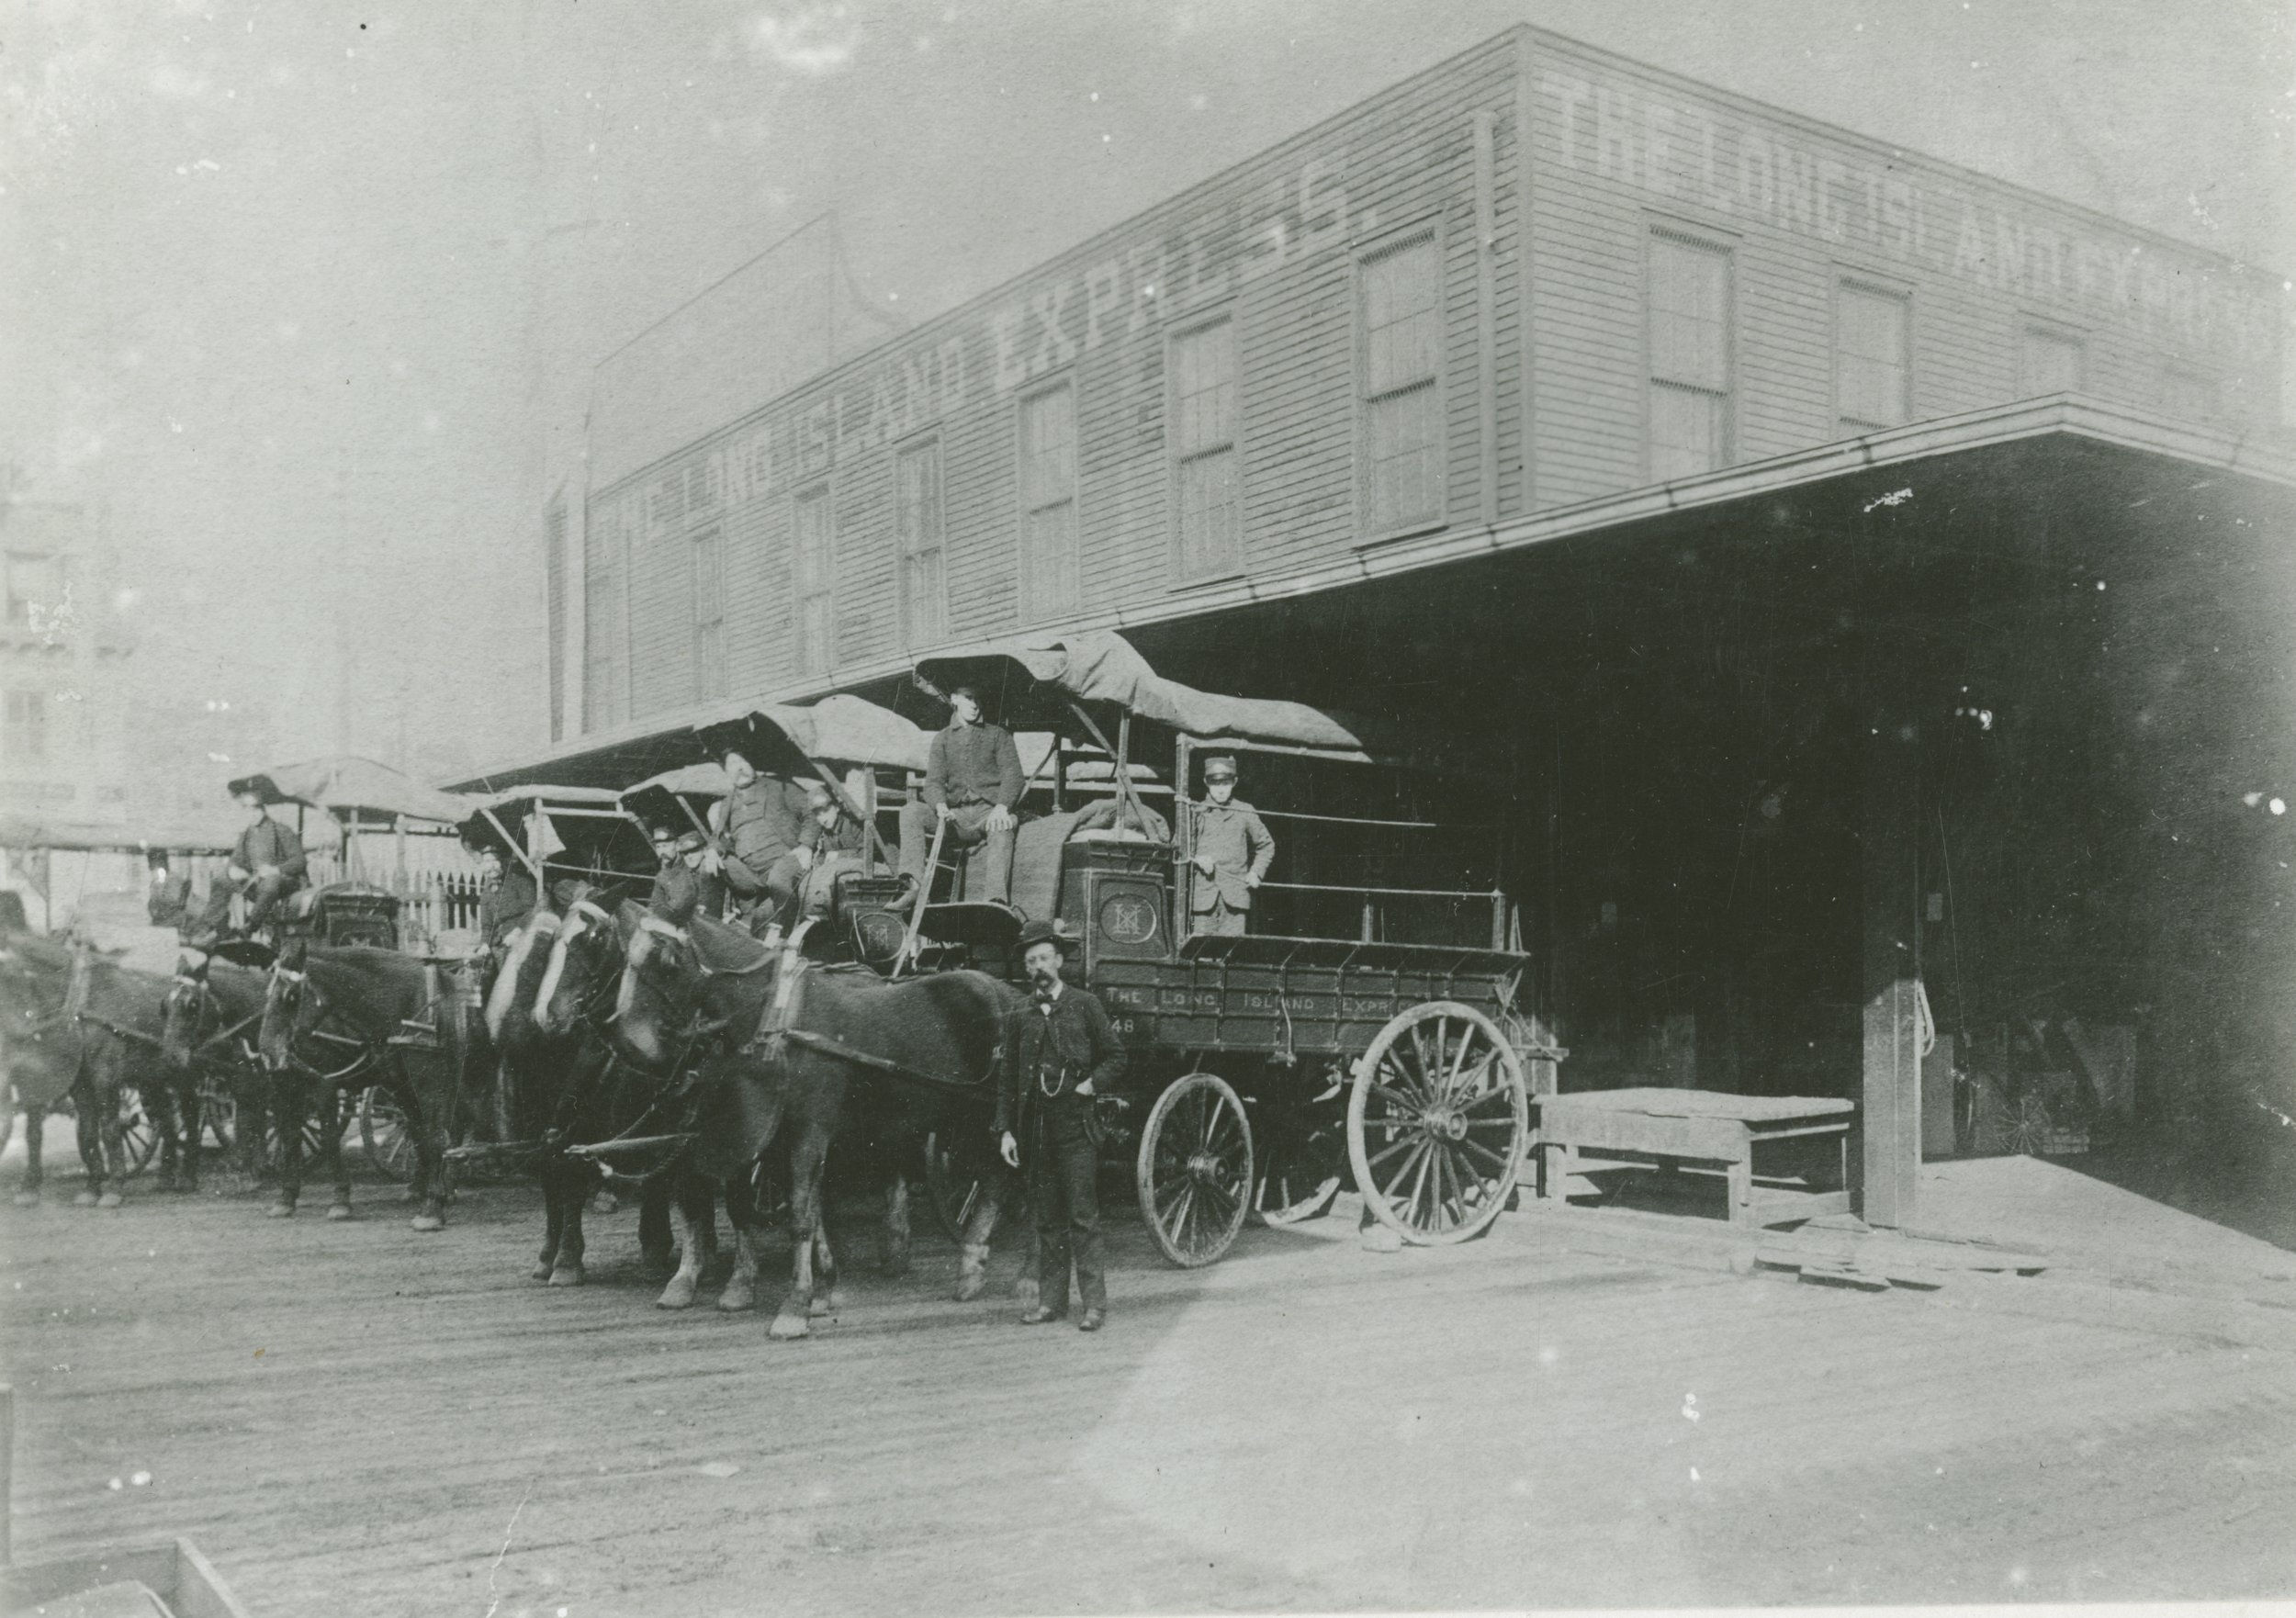  Drivers of the Long Island Express Company pose with their horse-drawn carriages for a group portrait in Long Island City, circa 1890. The express service was indispensable to the railroad's business model.  William J. Rugen Image Collection. Courte